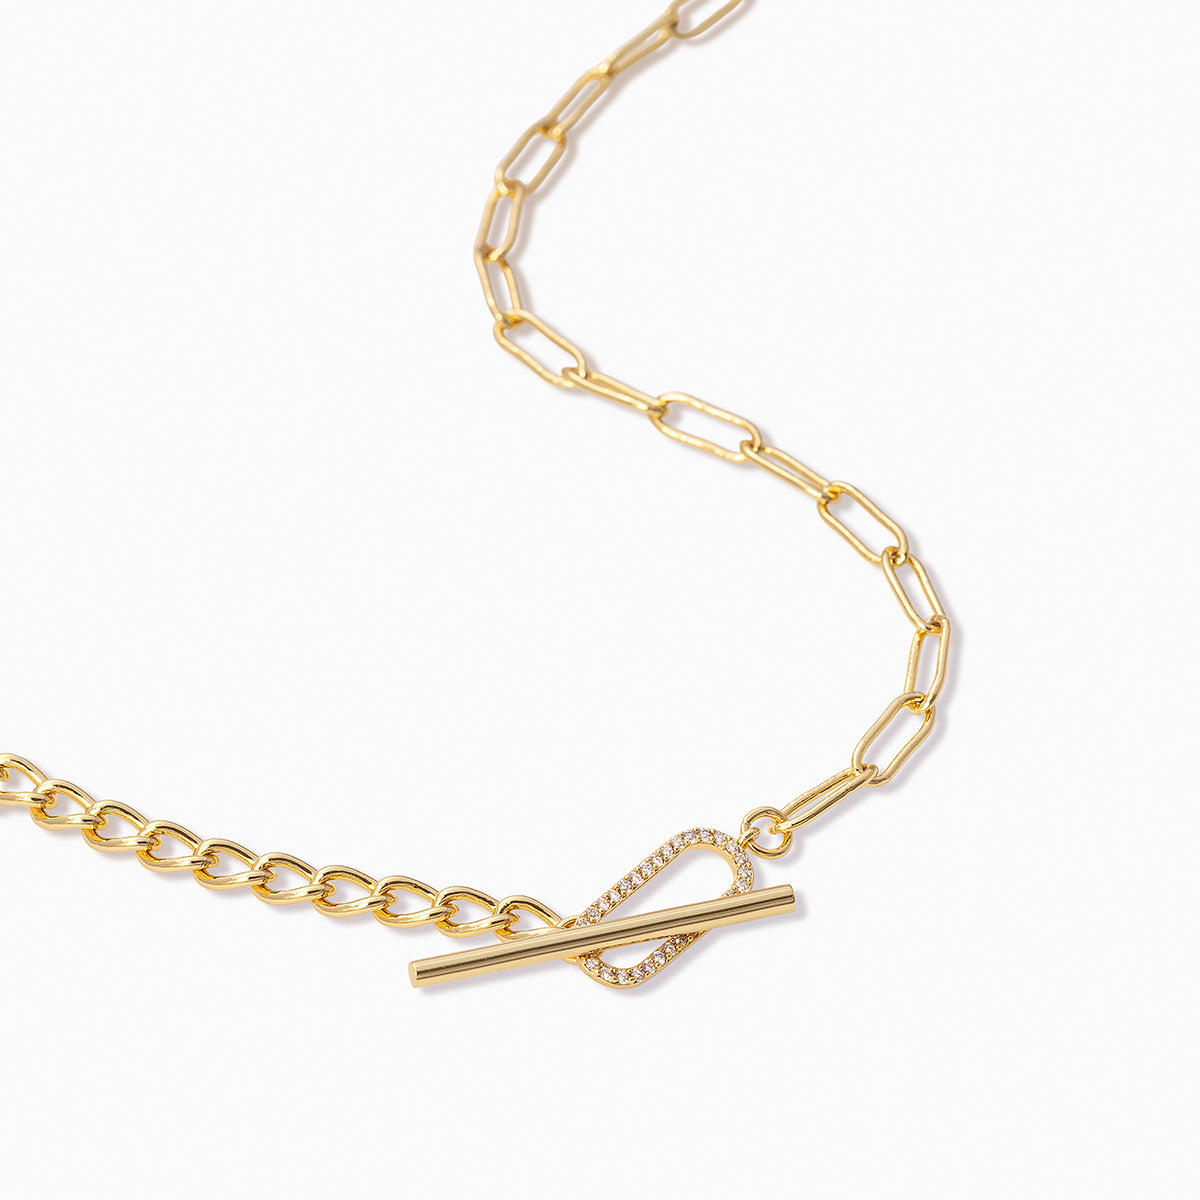 All in One Necklace | Gold | Product Detail Image | Uncommon James